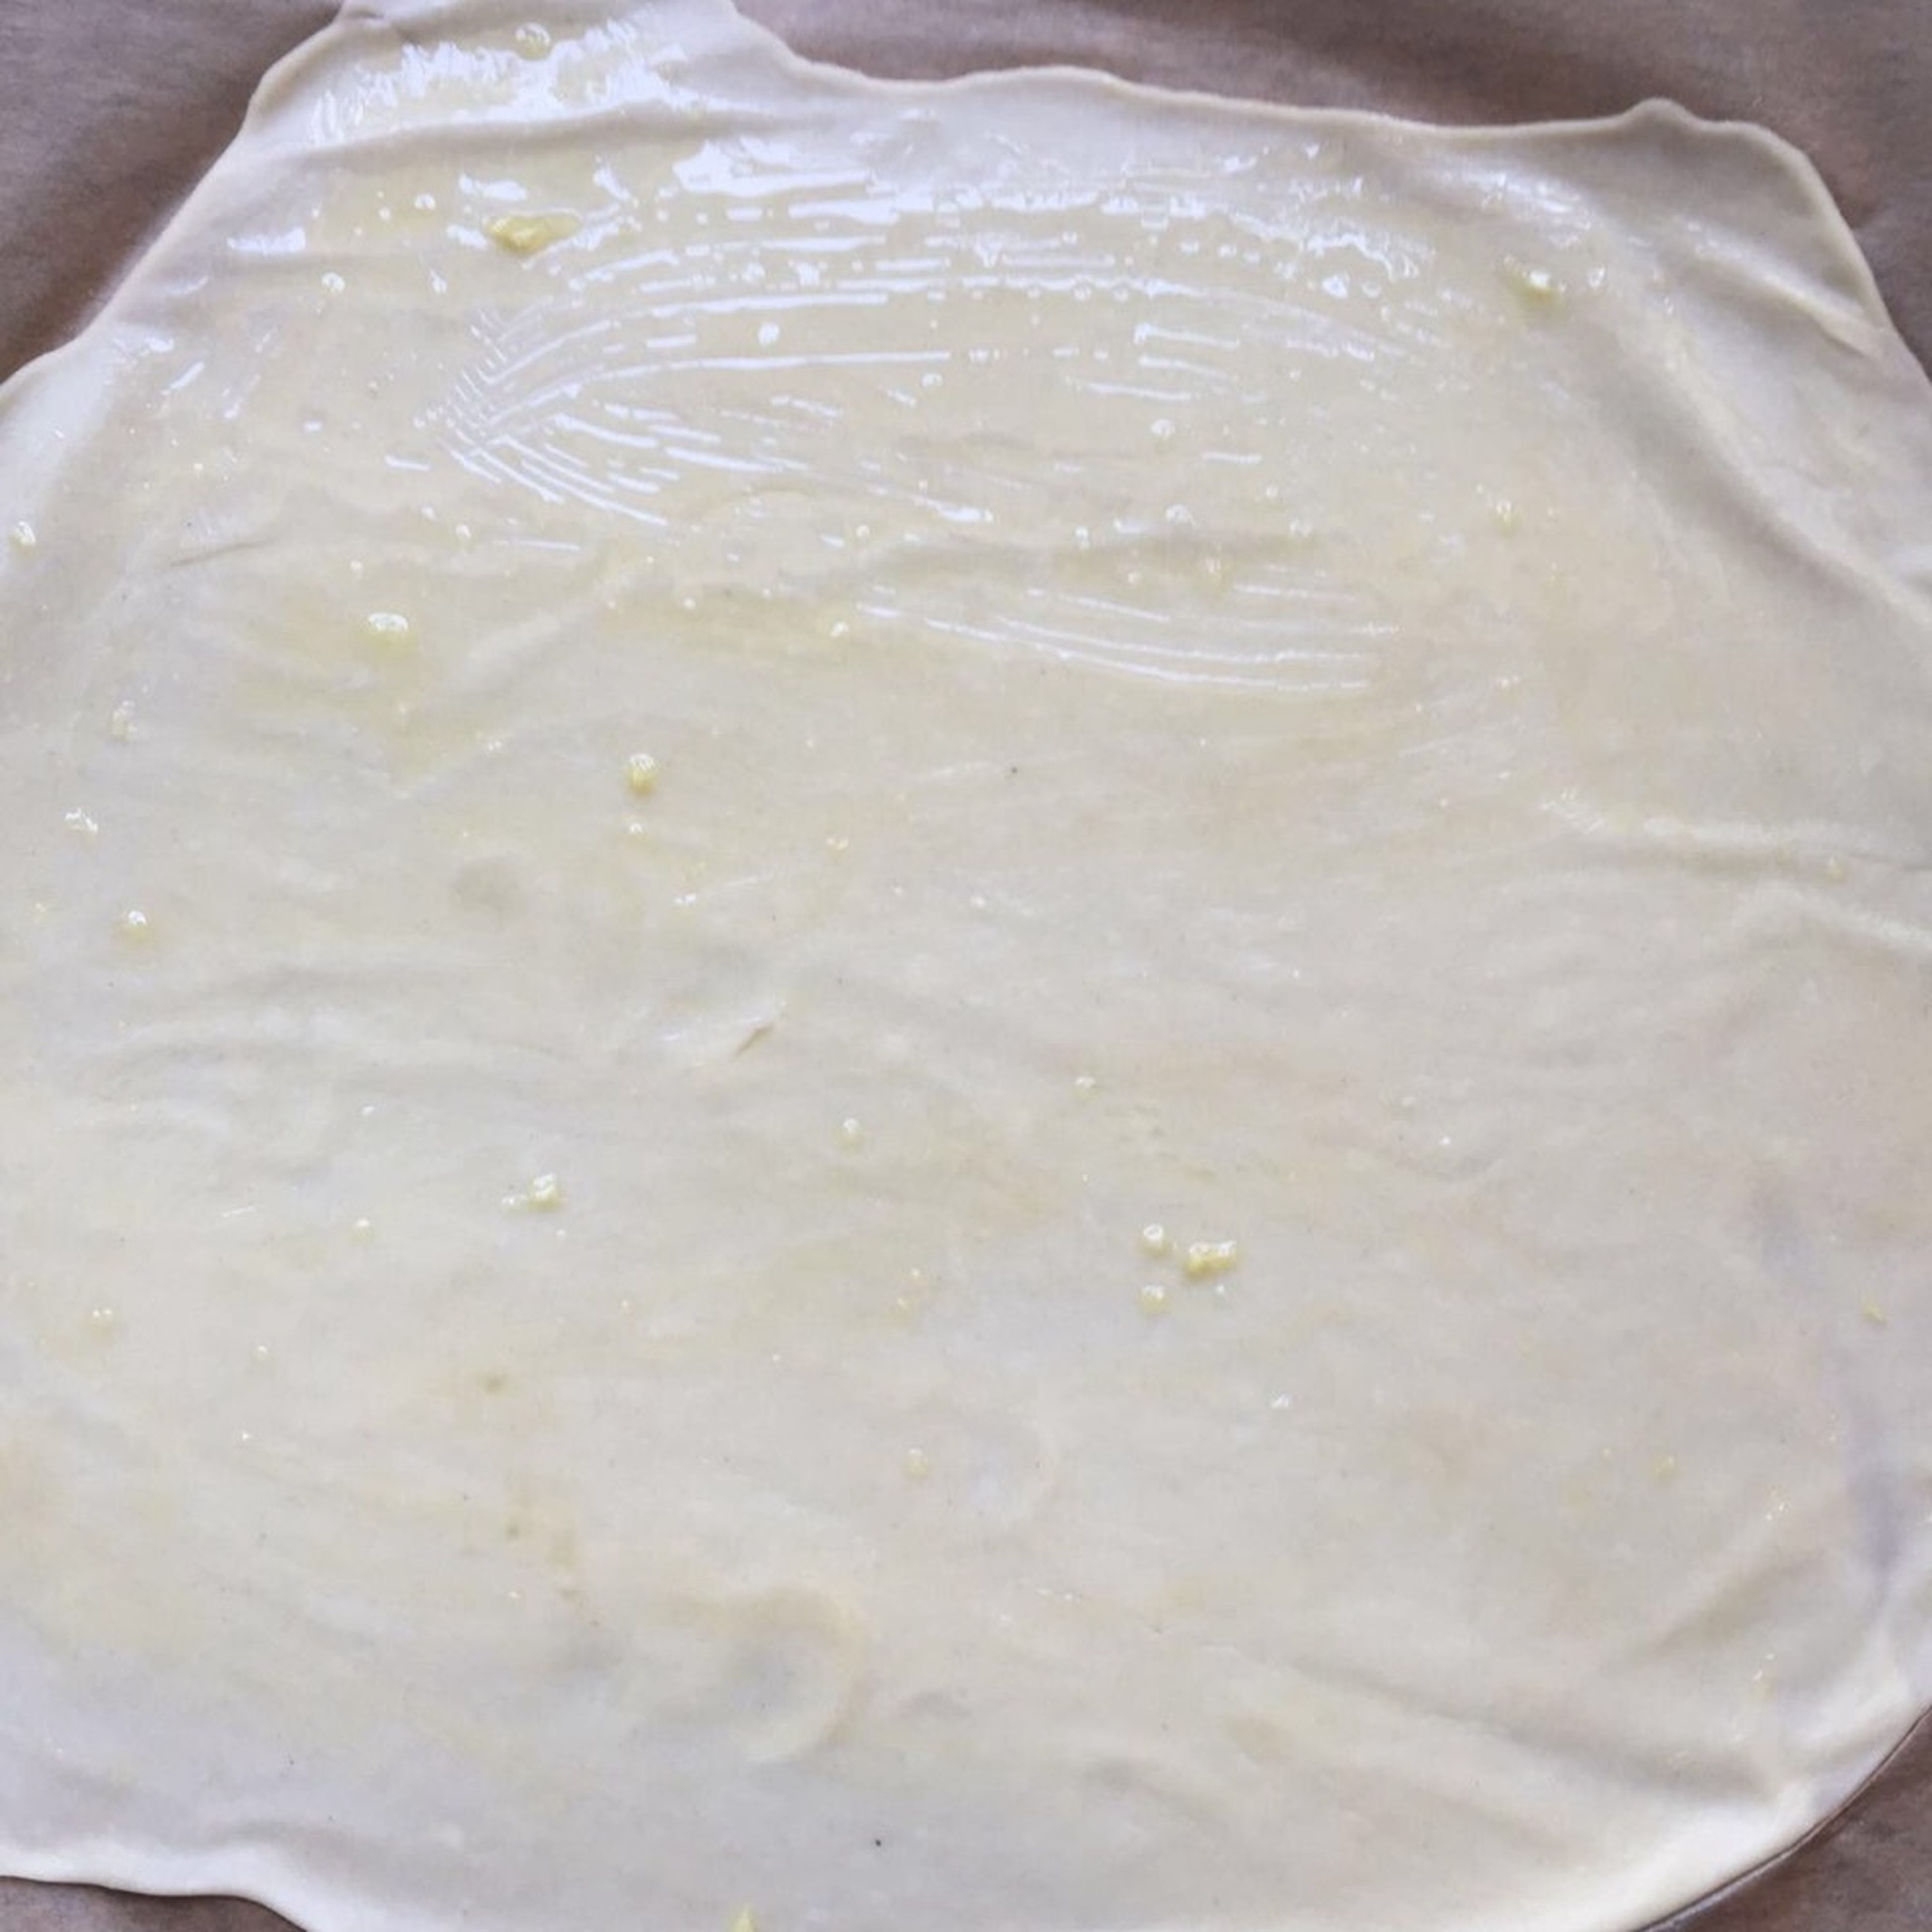 Brush the rested flatbreads with garlic oil.